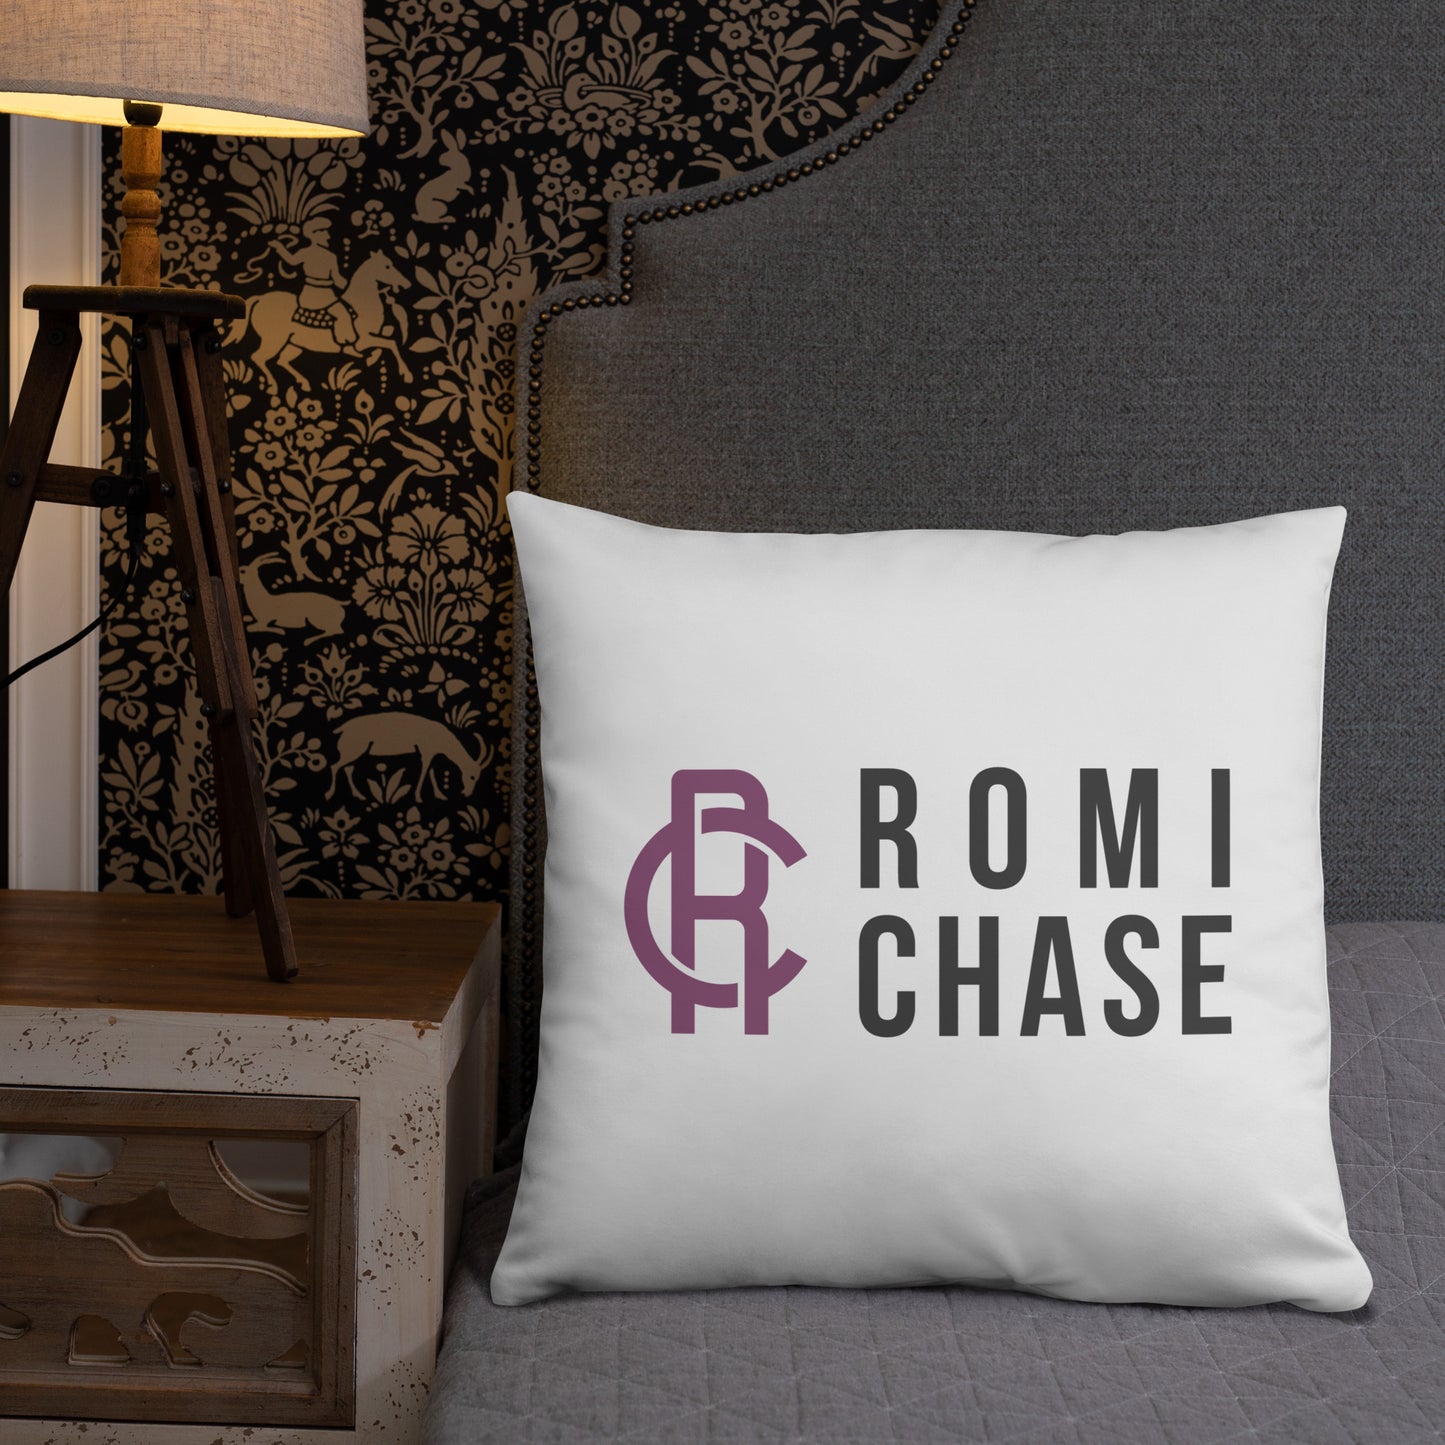 Basic Pillow w/ Romi Chase Image / Star background and Logo on the back